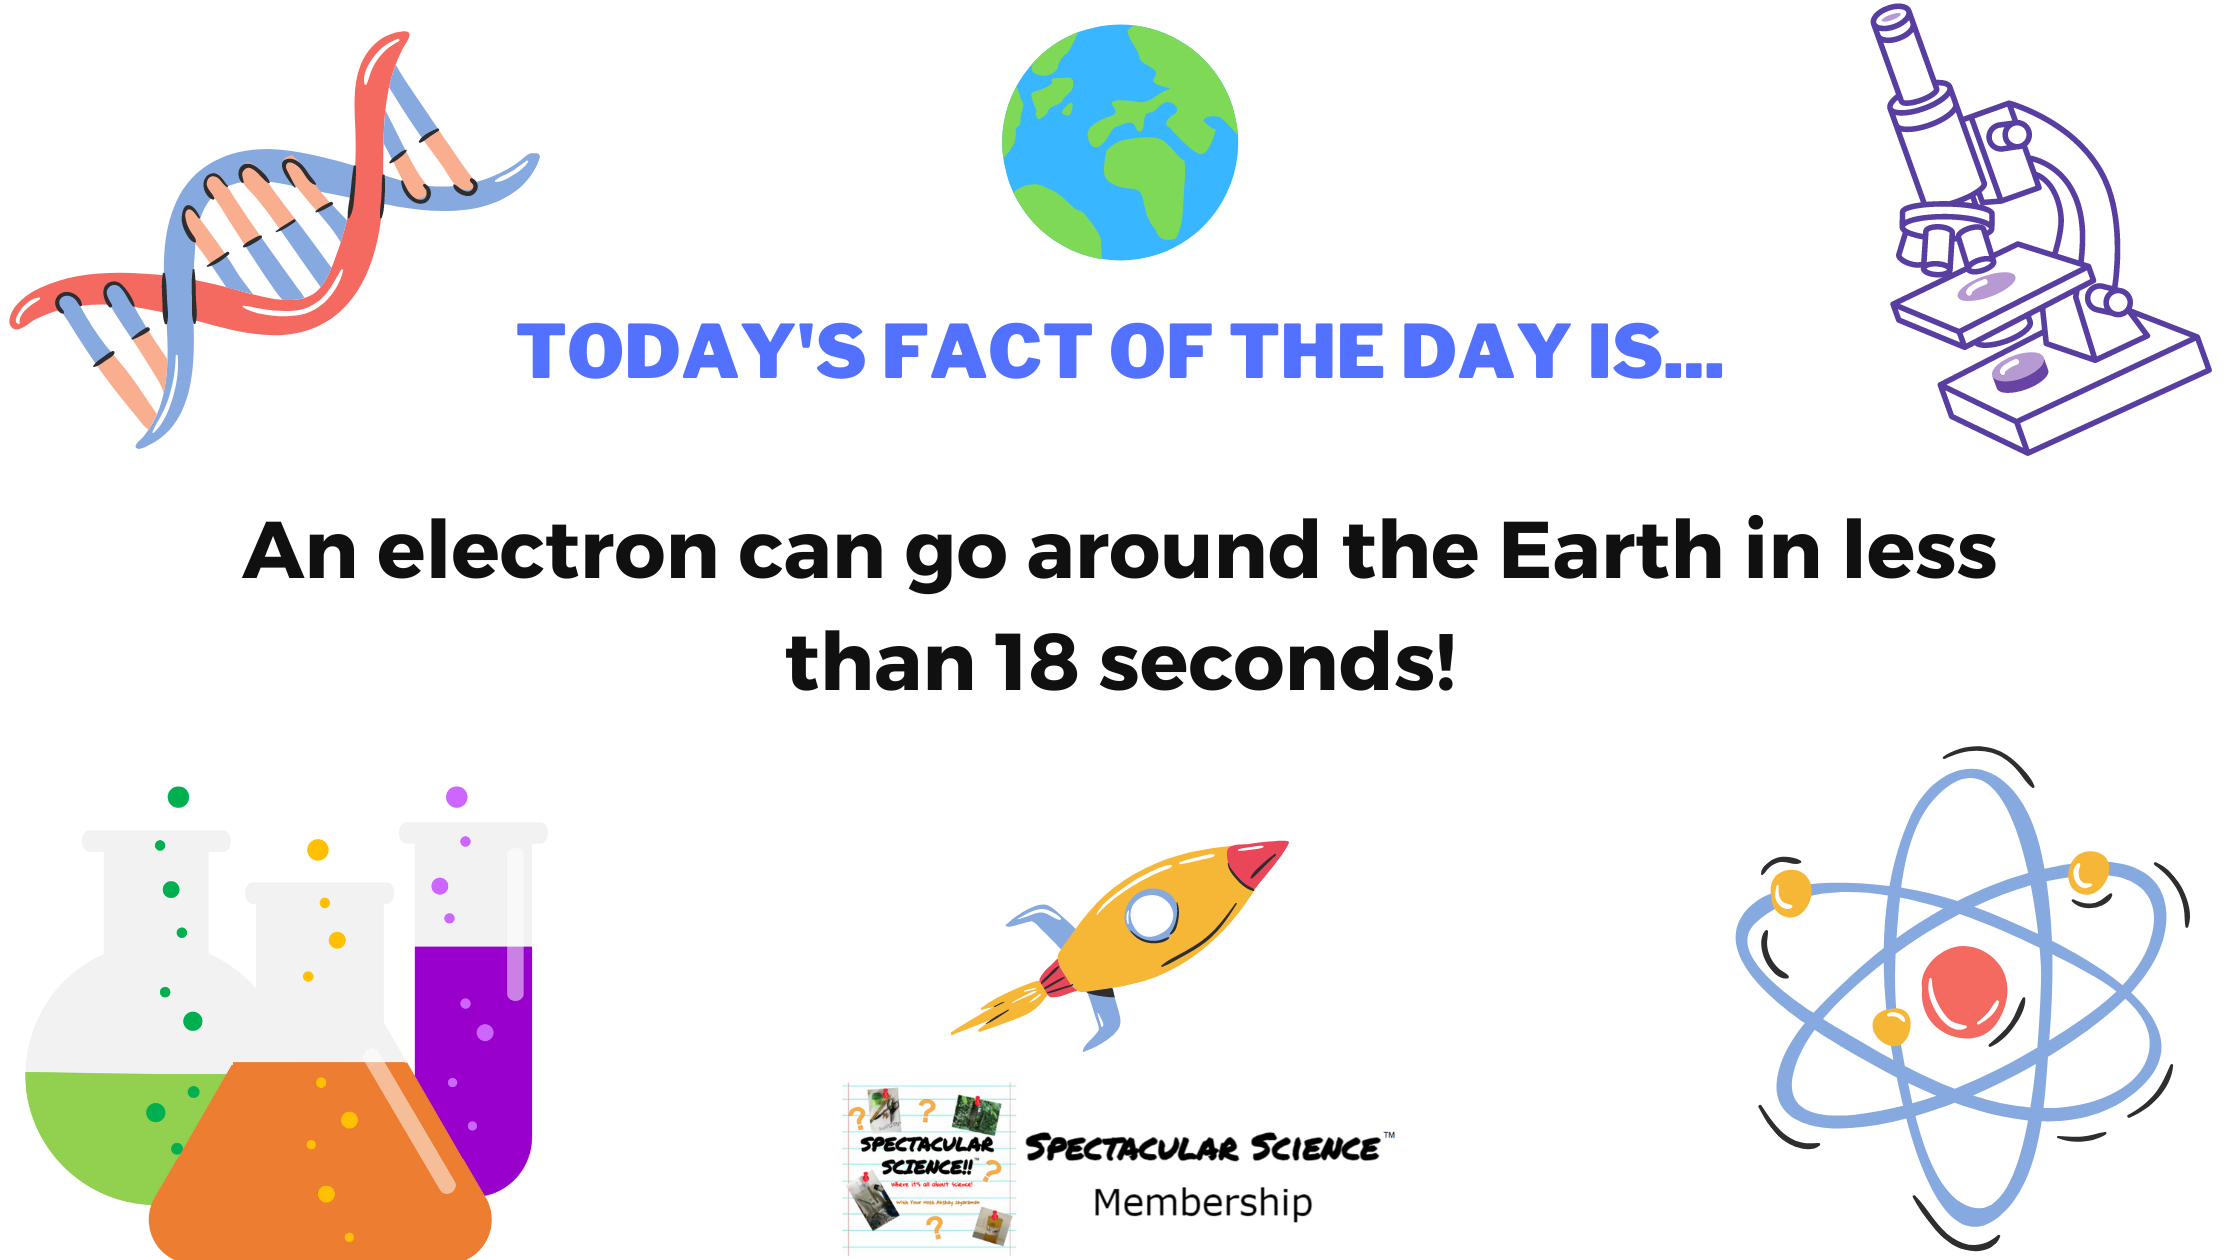 Fact of the Day Image November 3rd